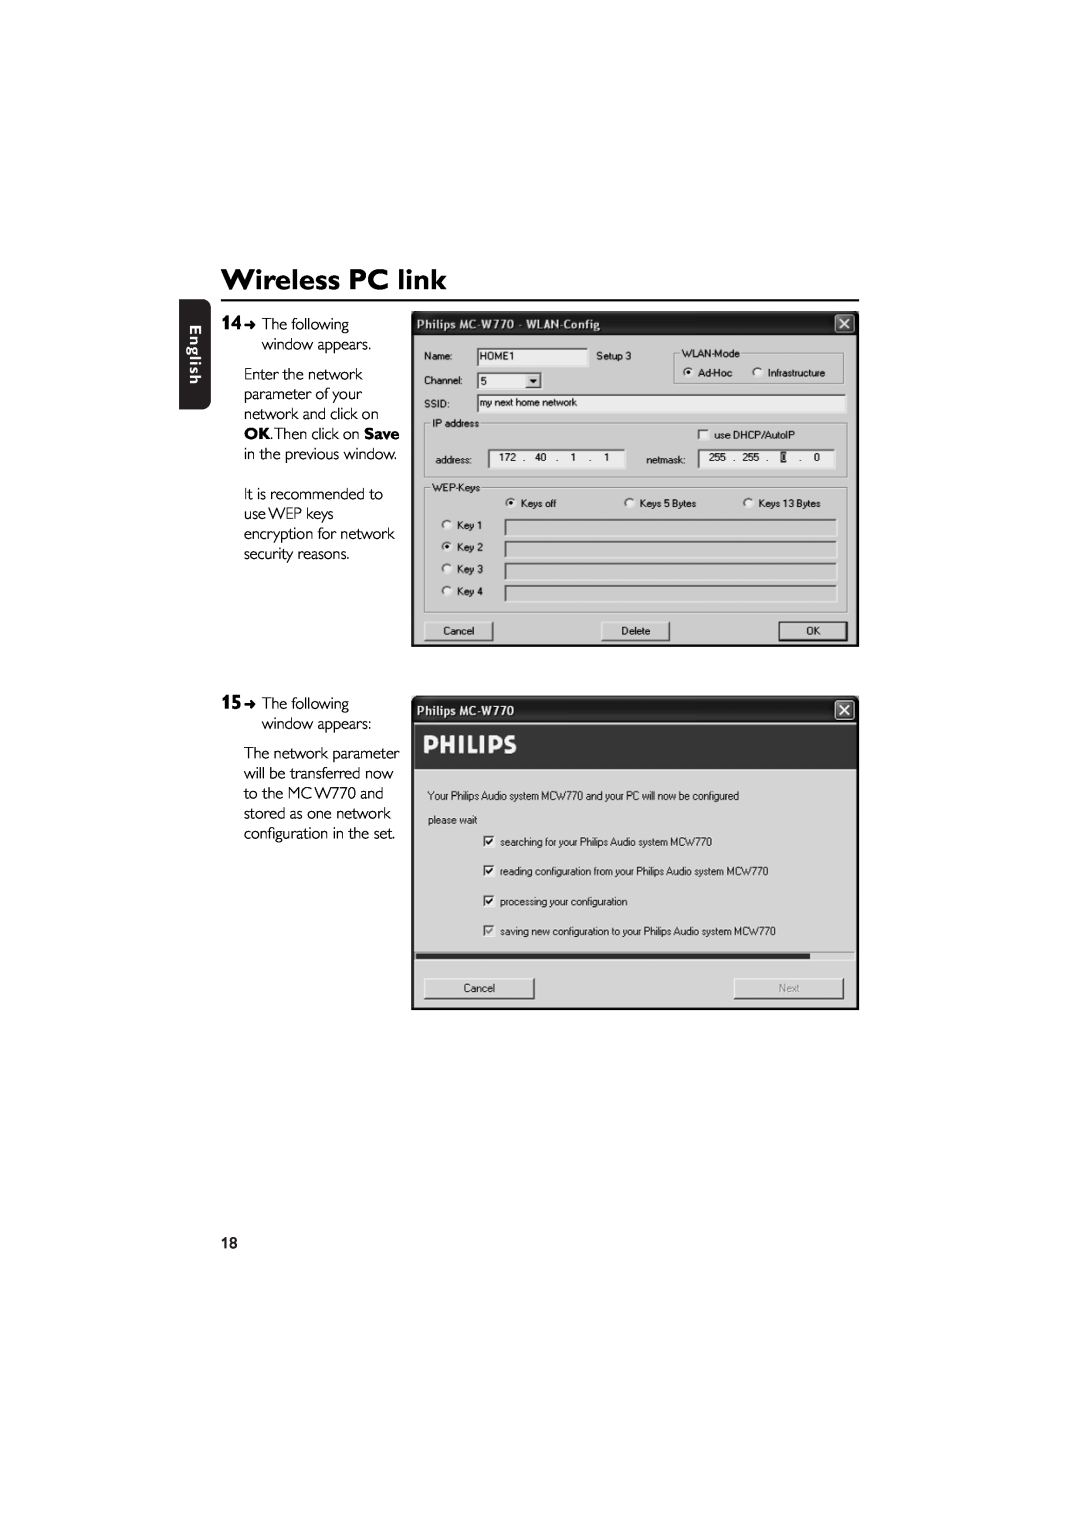 Philips MCW770 manual Wireless PC link, English, The following window appears 